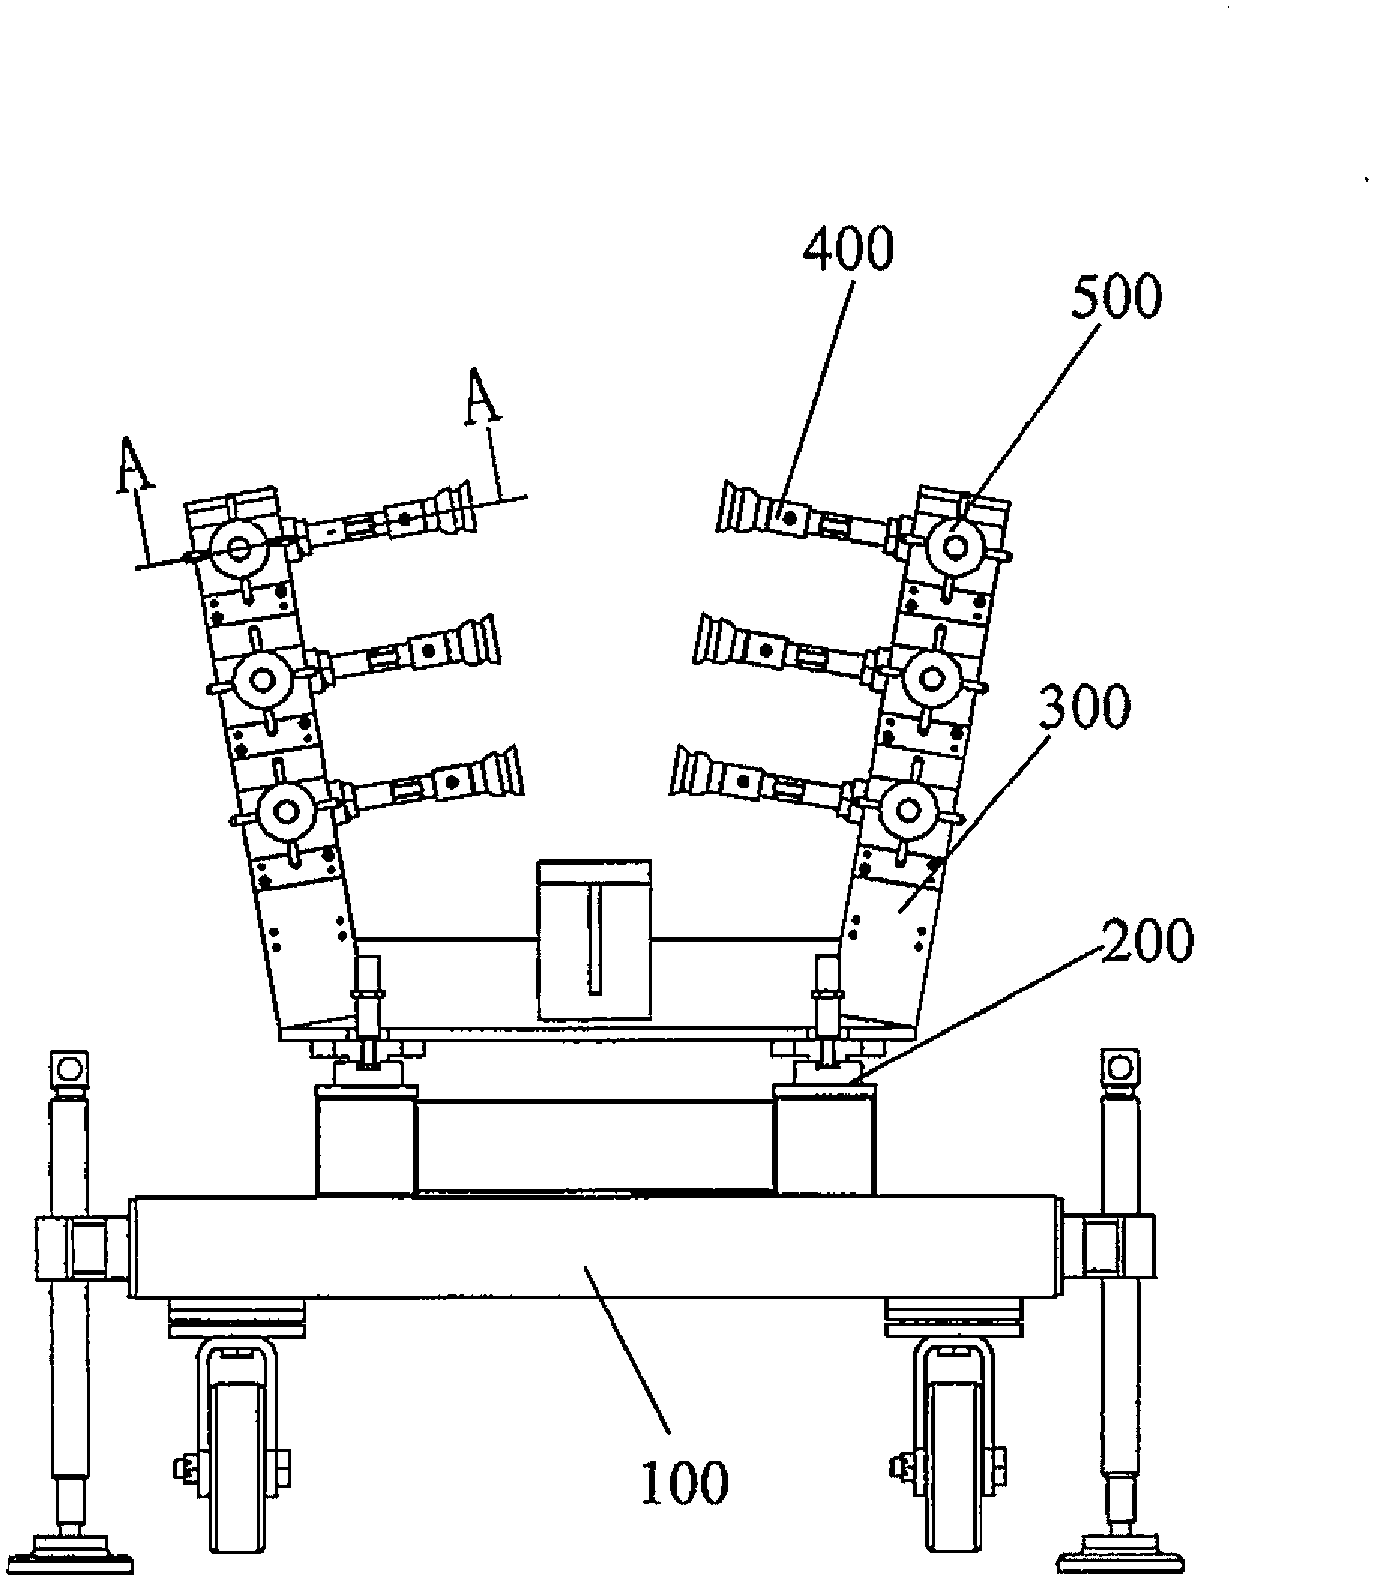 Clamping tool for trimming wing leading edge covering